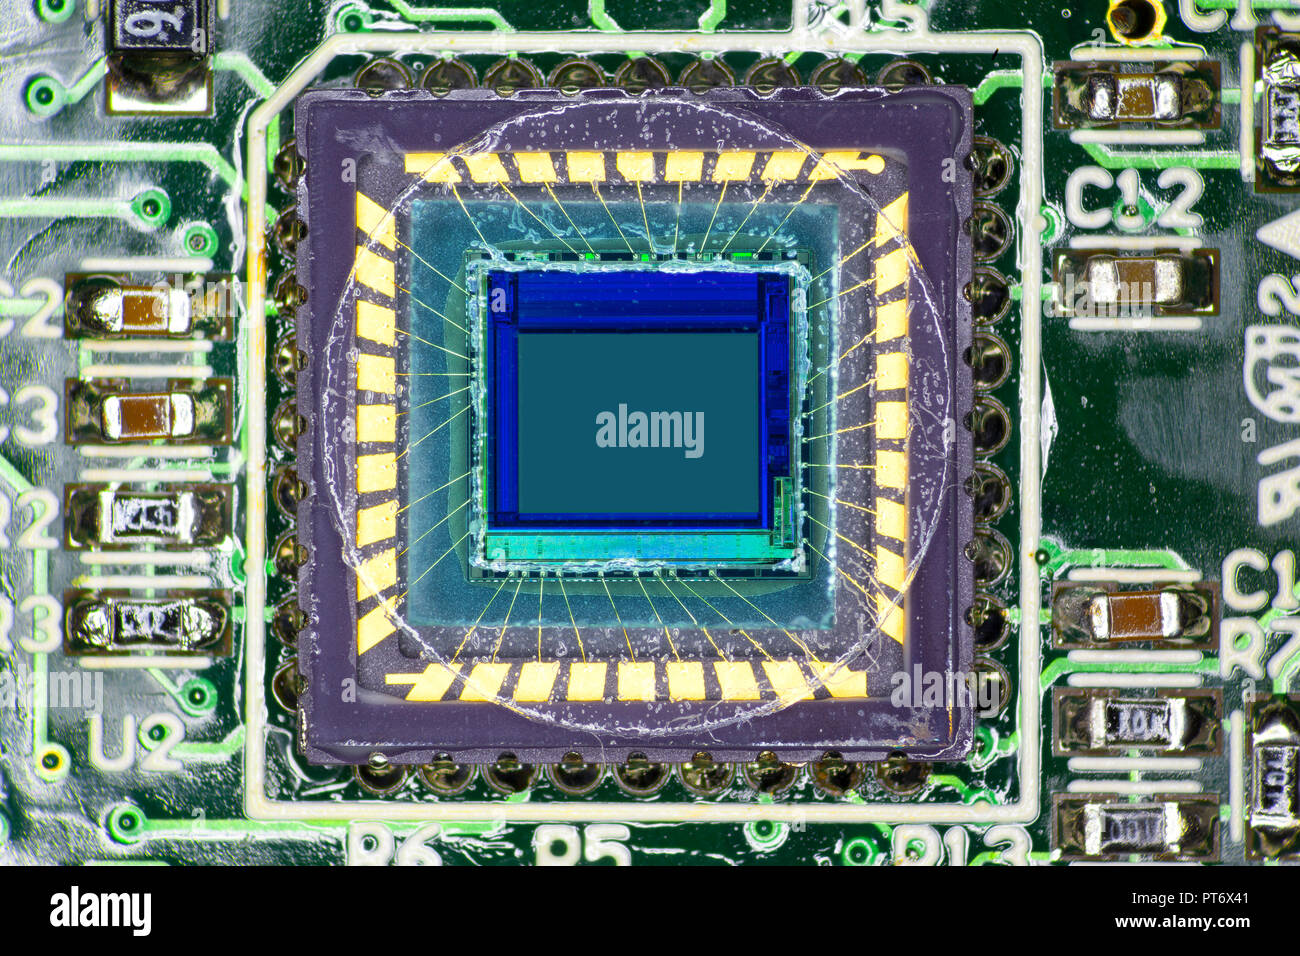 High macro view of a CMOS camera sensor (webcam) showing gold wire contacts and surrounding circuitry. Stock Photo